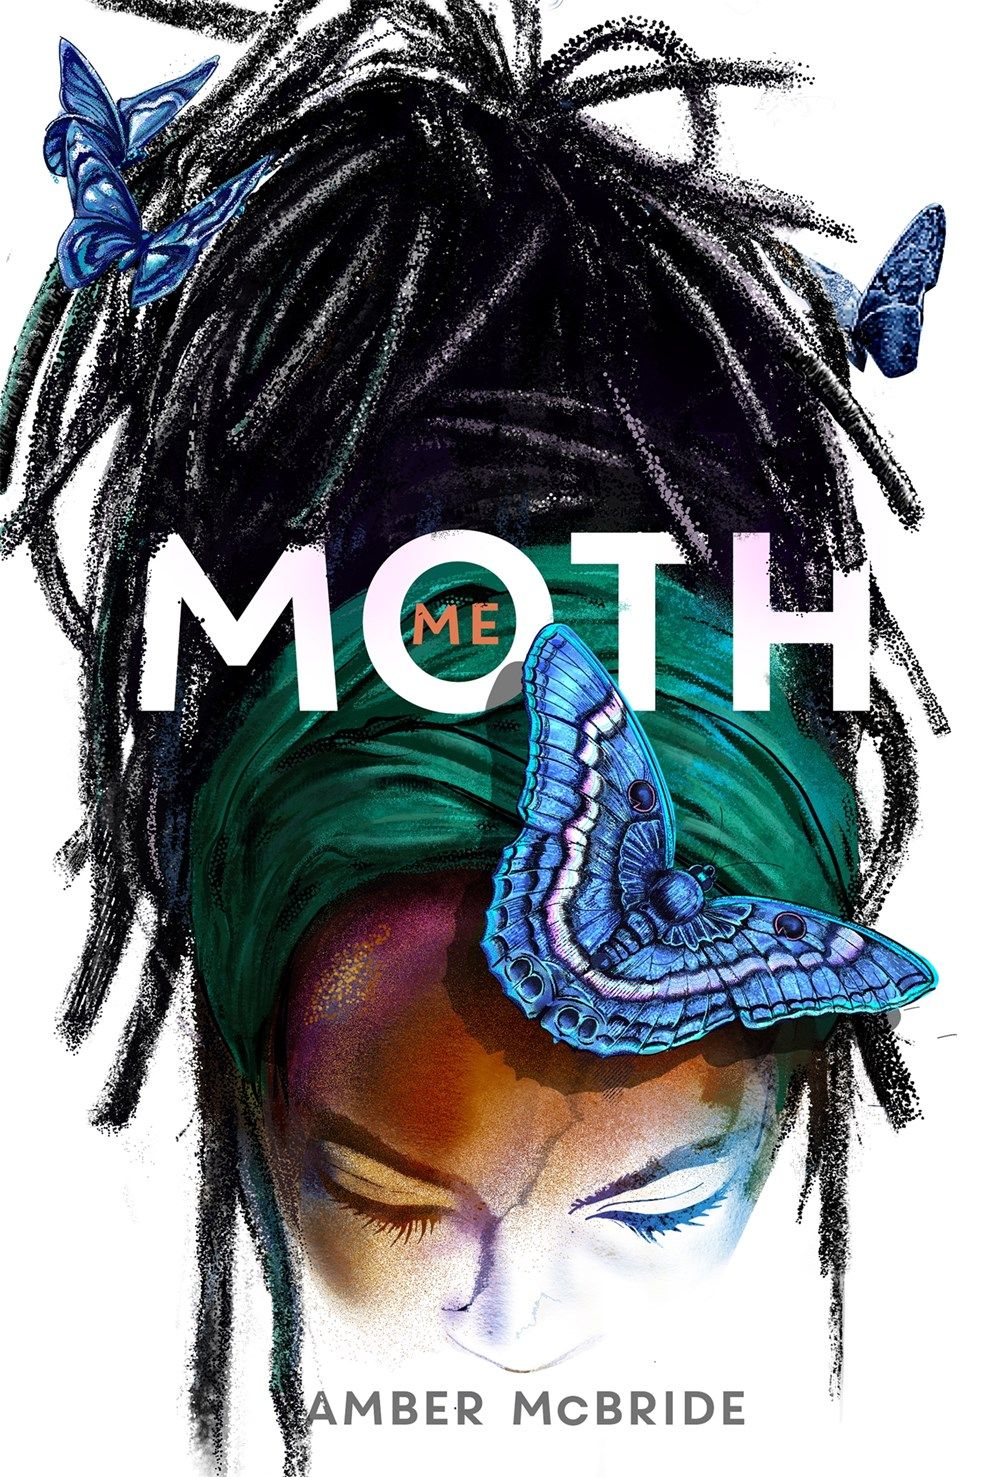 Cover image "Me (Moth)" by Amber McBride.